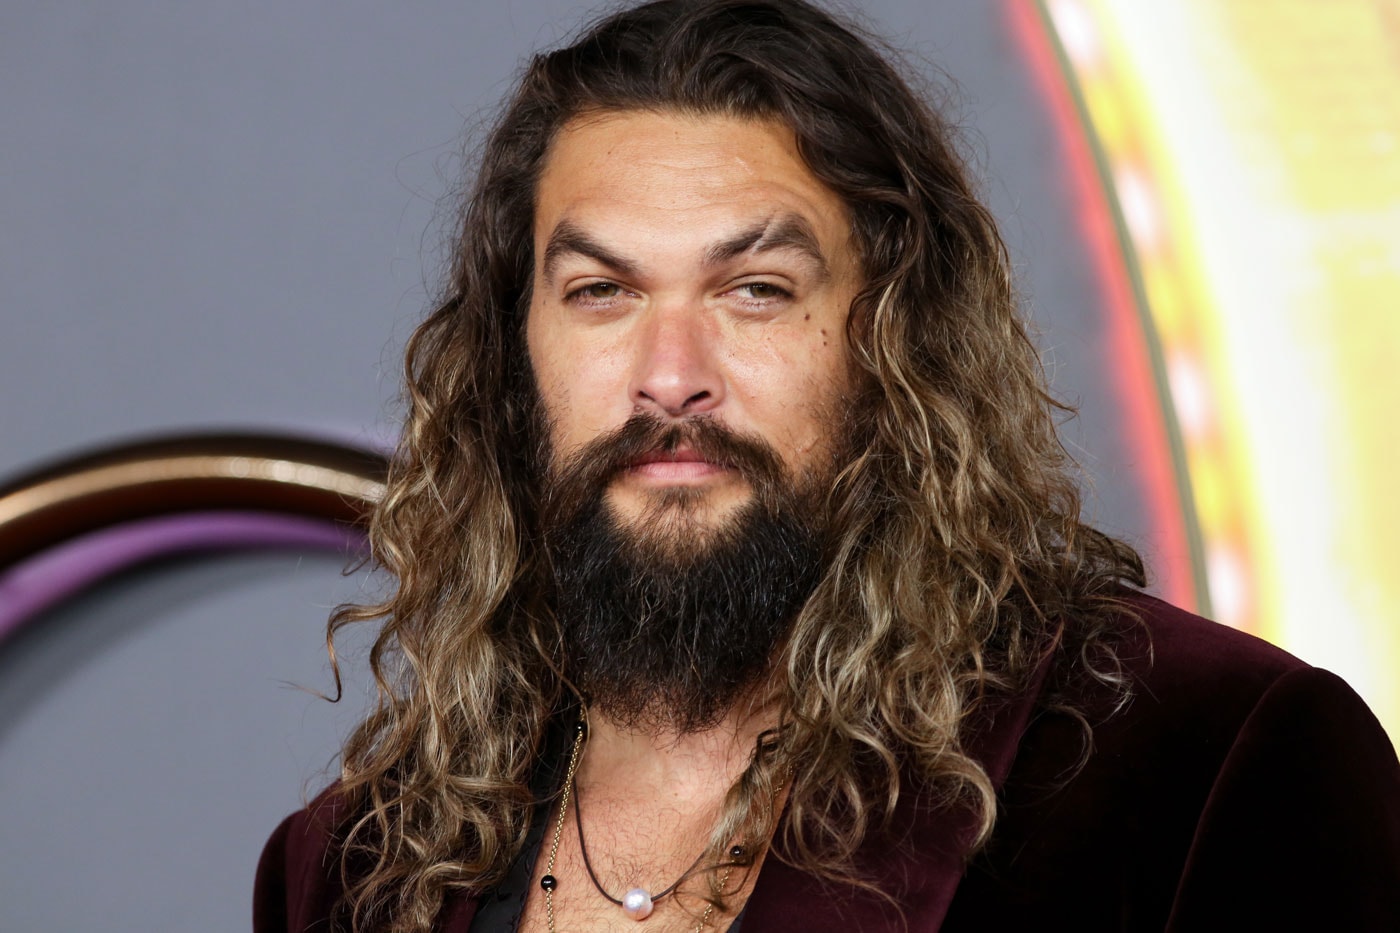 Jason Momoa Confirms He Will Play "Bad Boy" Lead in 'Fast and Furious 10' Film vin diesel michelle rodriguez tyrese gibson ludacris sung kang charlize theron aquaman